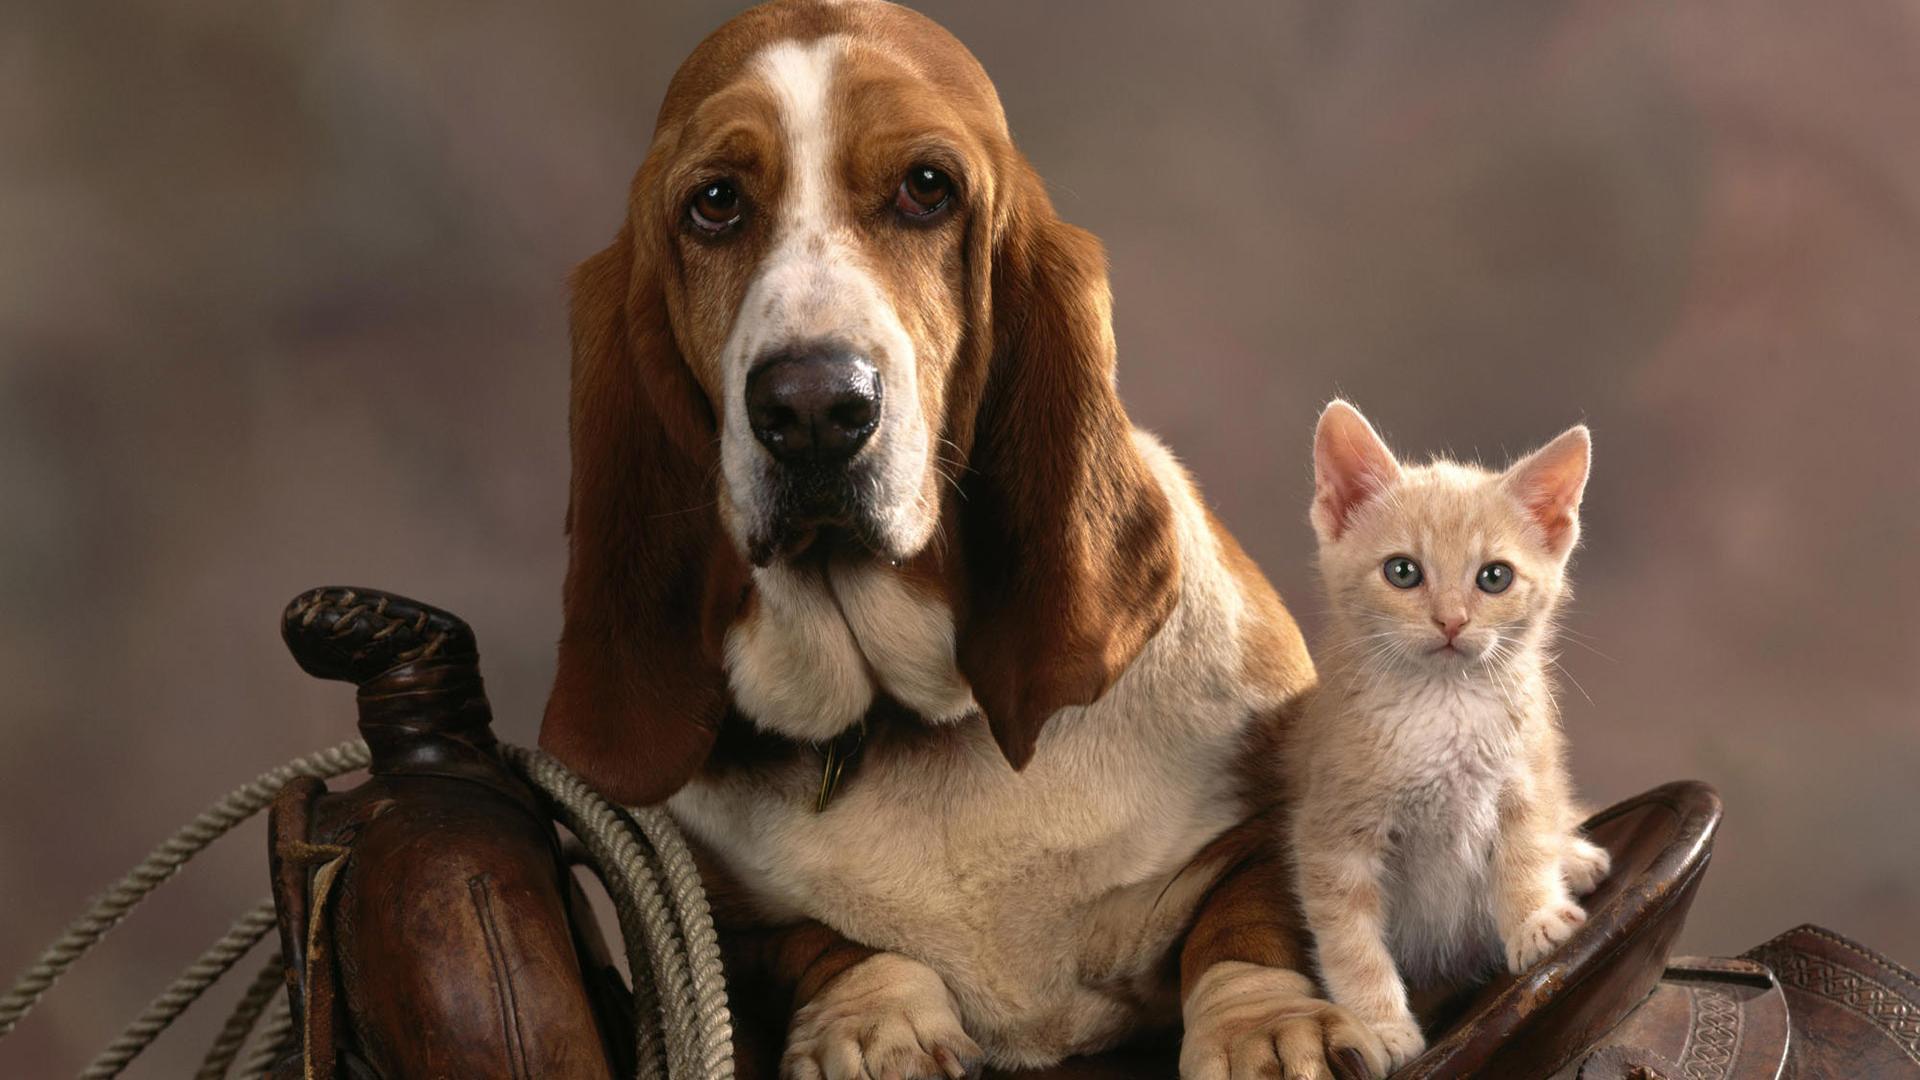 Cat And Dog Wallpaper